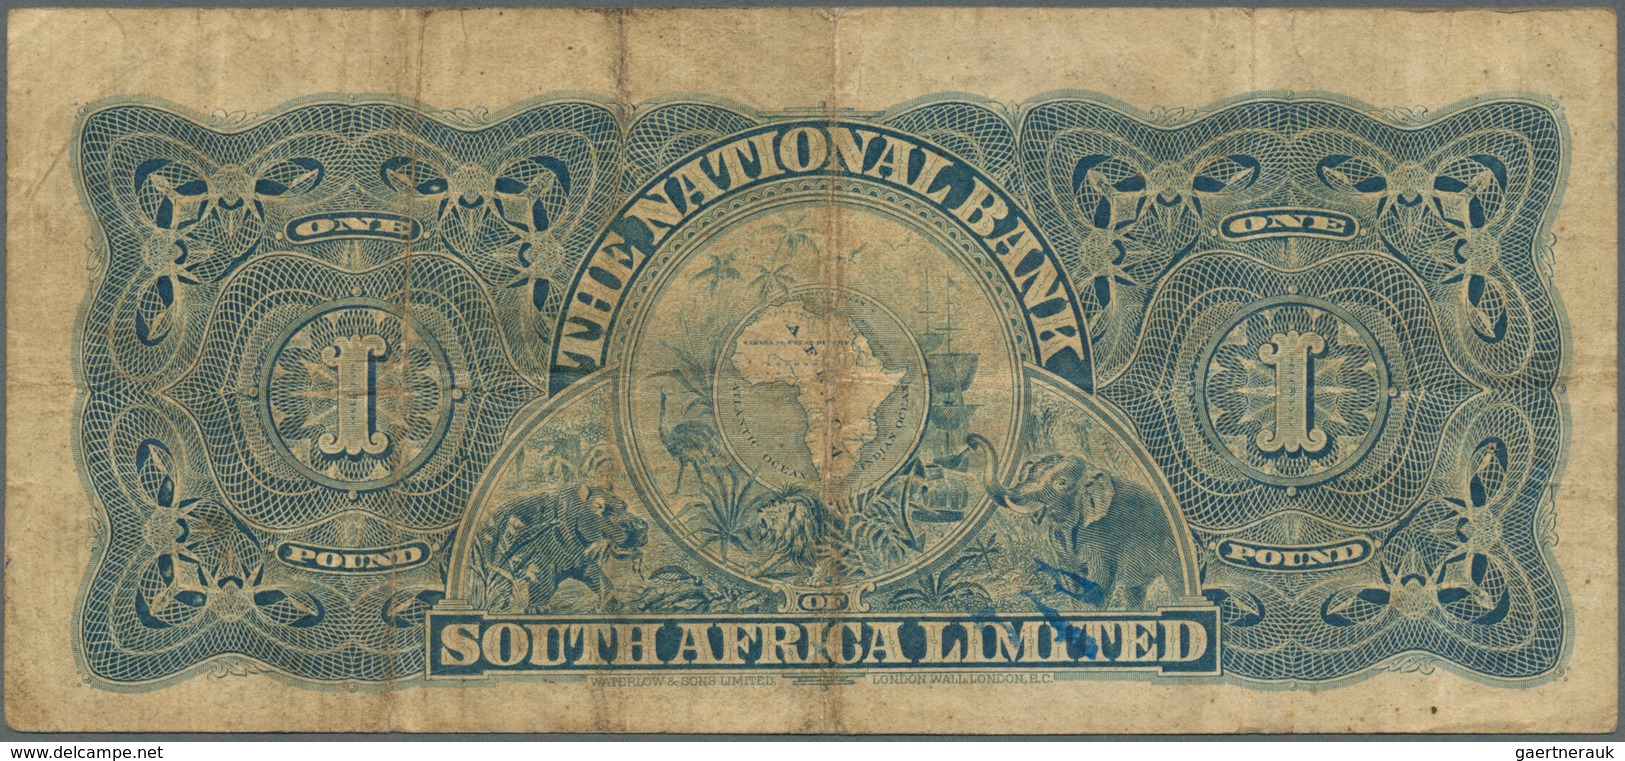 02386 South Africa / Südafrika: Natal Issue Of National Bank Of South Africa, 1 Pound 1919 P. S392, Used W - Sudafrica